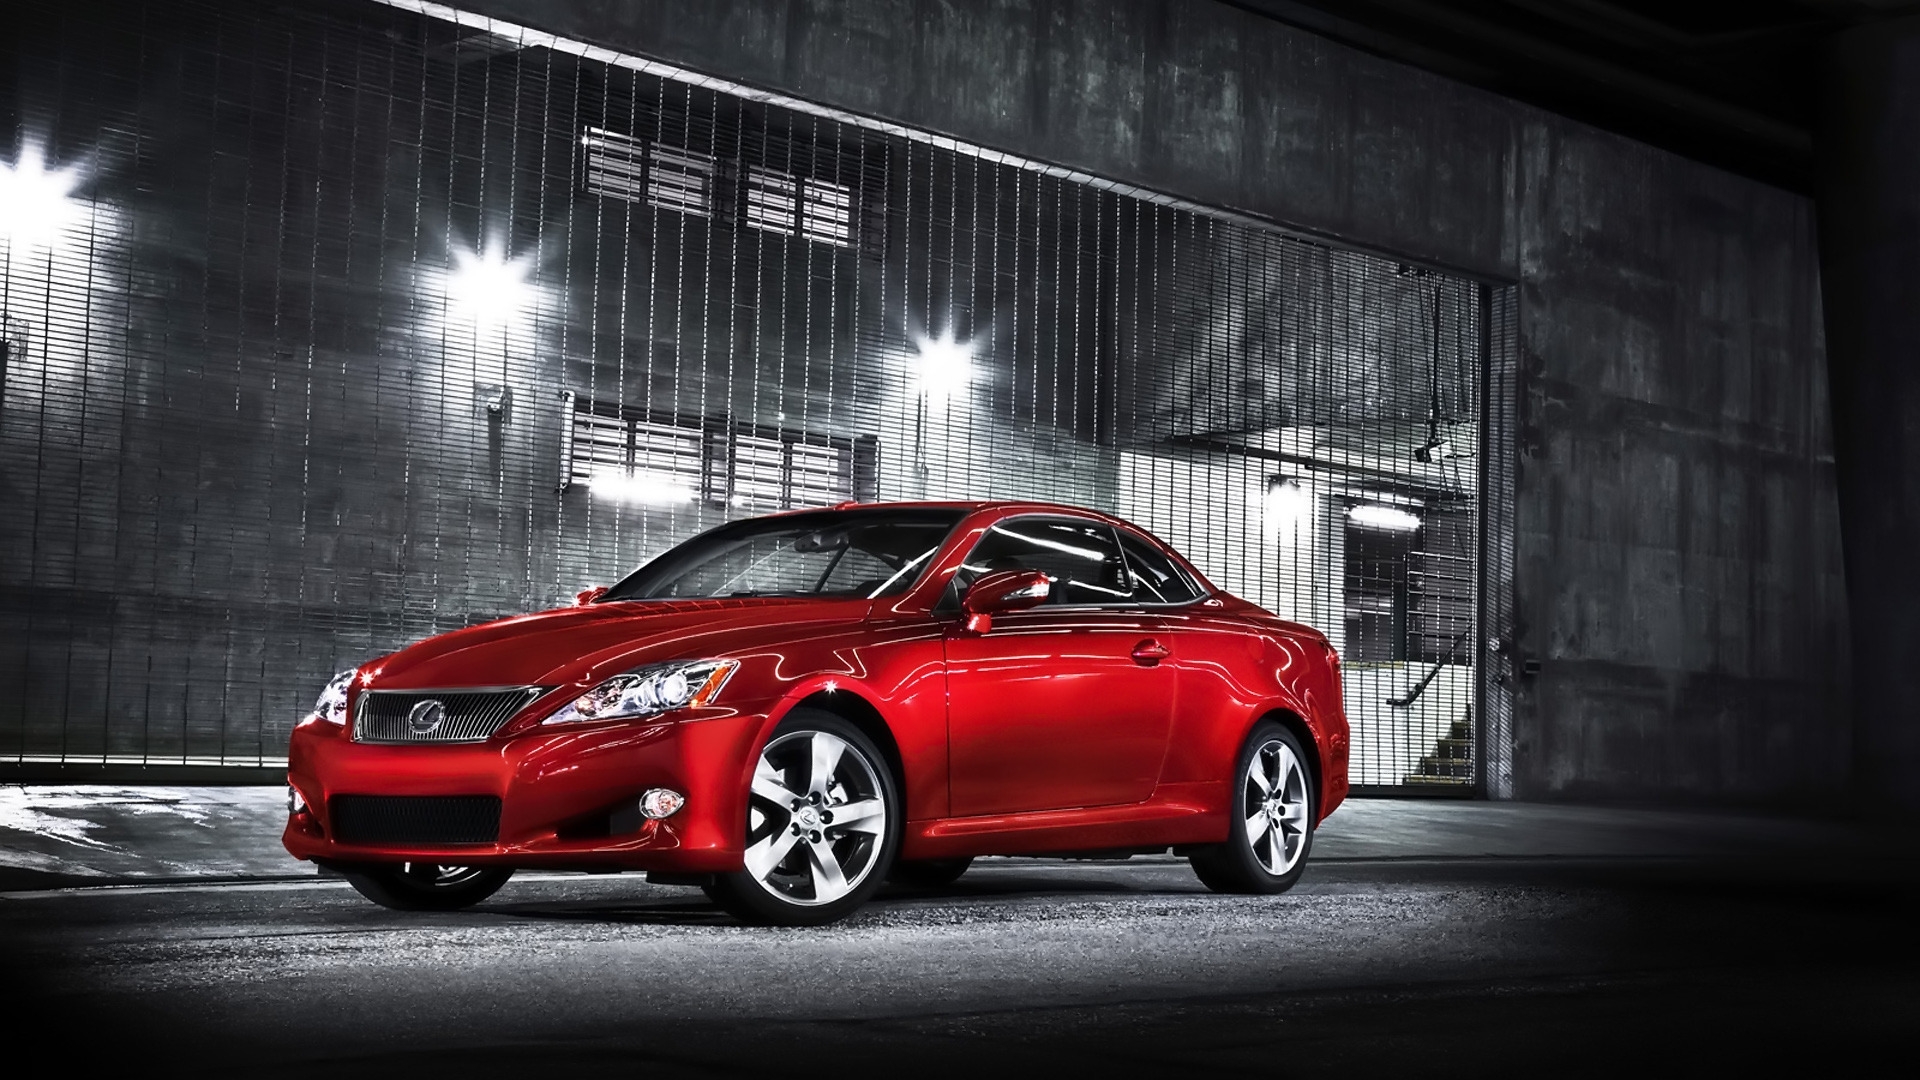 2010 Lexus ISC 250C Red for 1920 x 1080 HDTV 1080p resolution